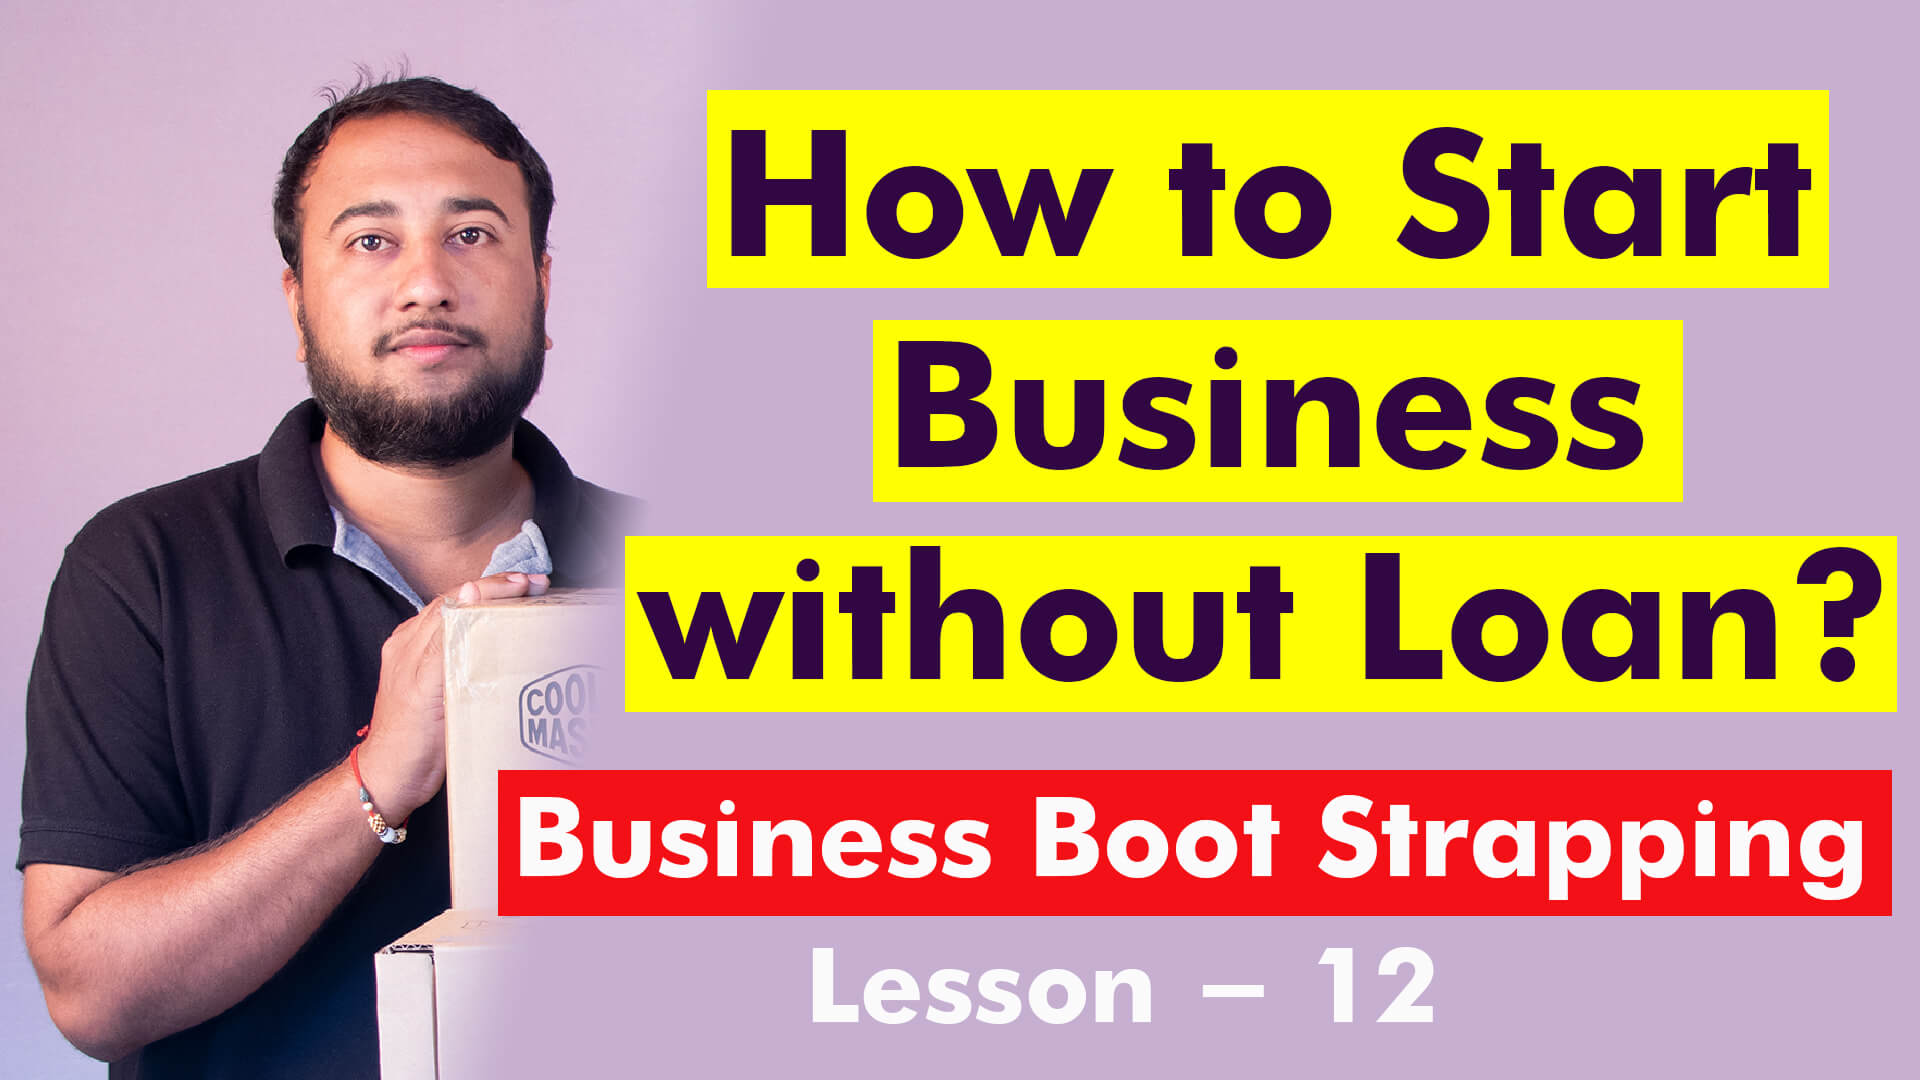 You are currently viewing Lesson – 12: How to Start Business without Loan? Business Boot Strapping in Hindi